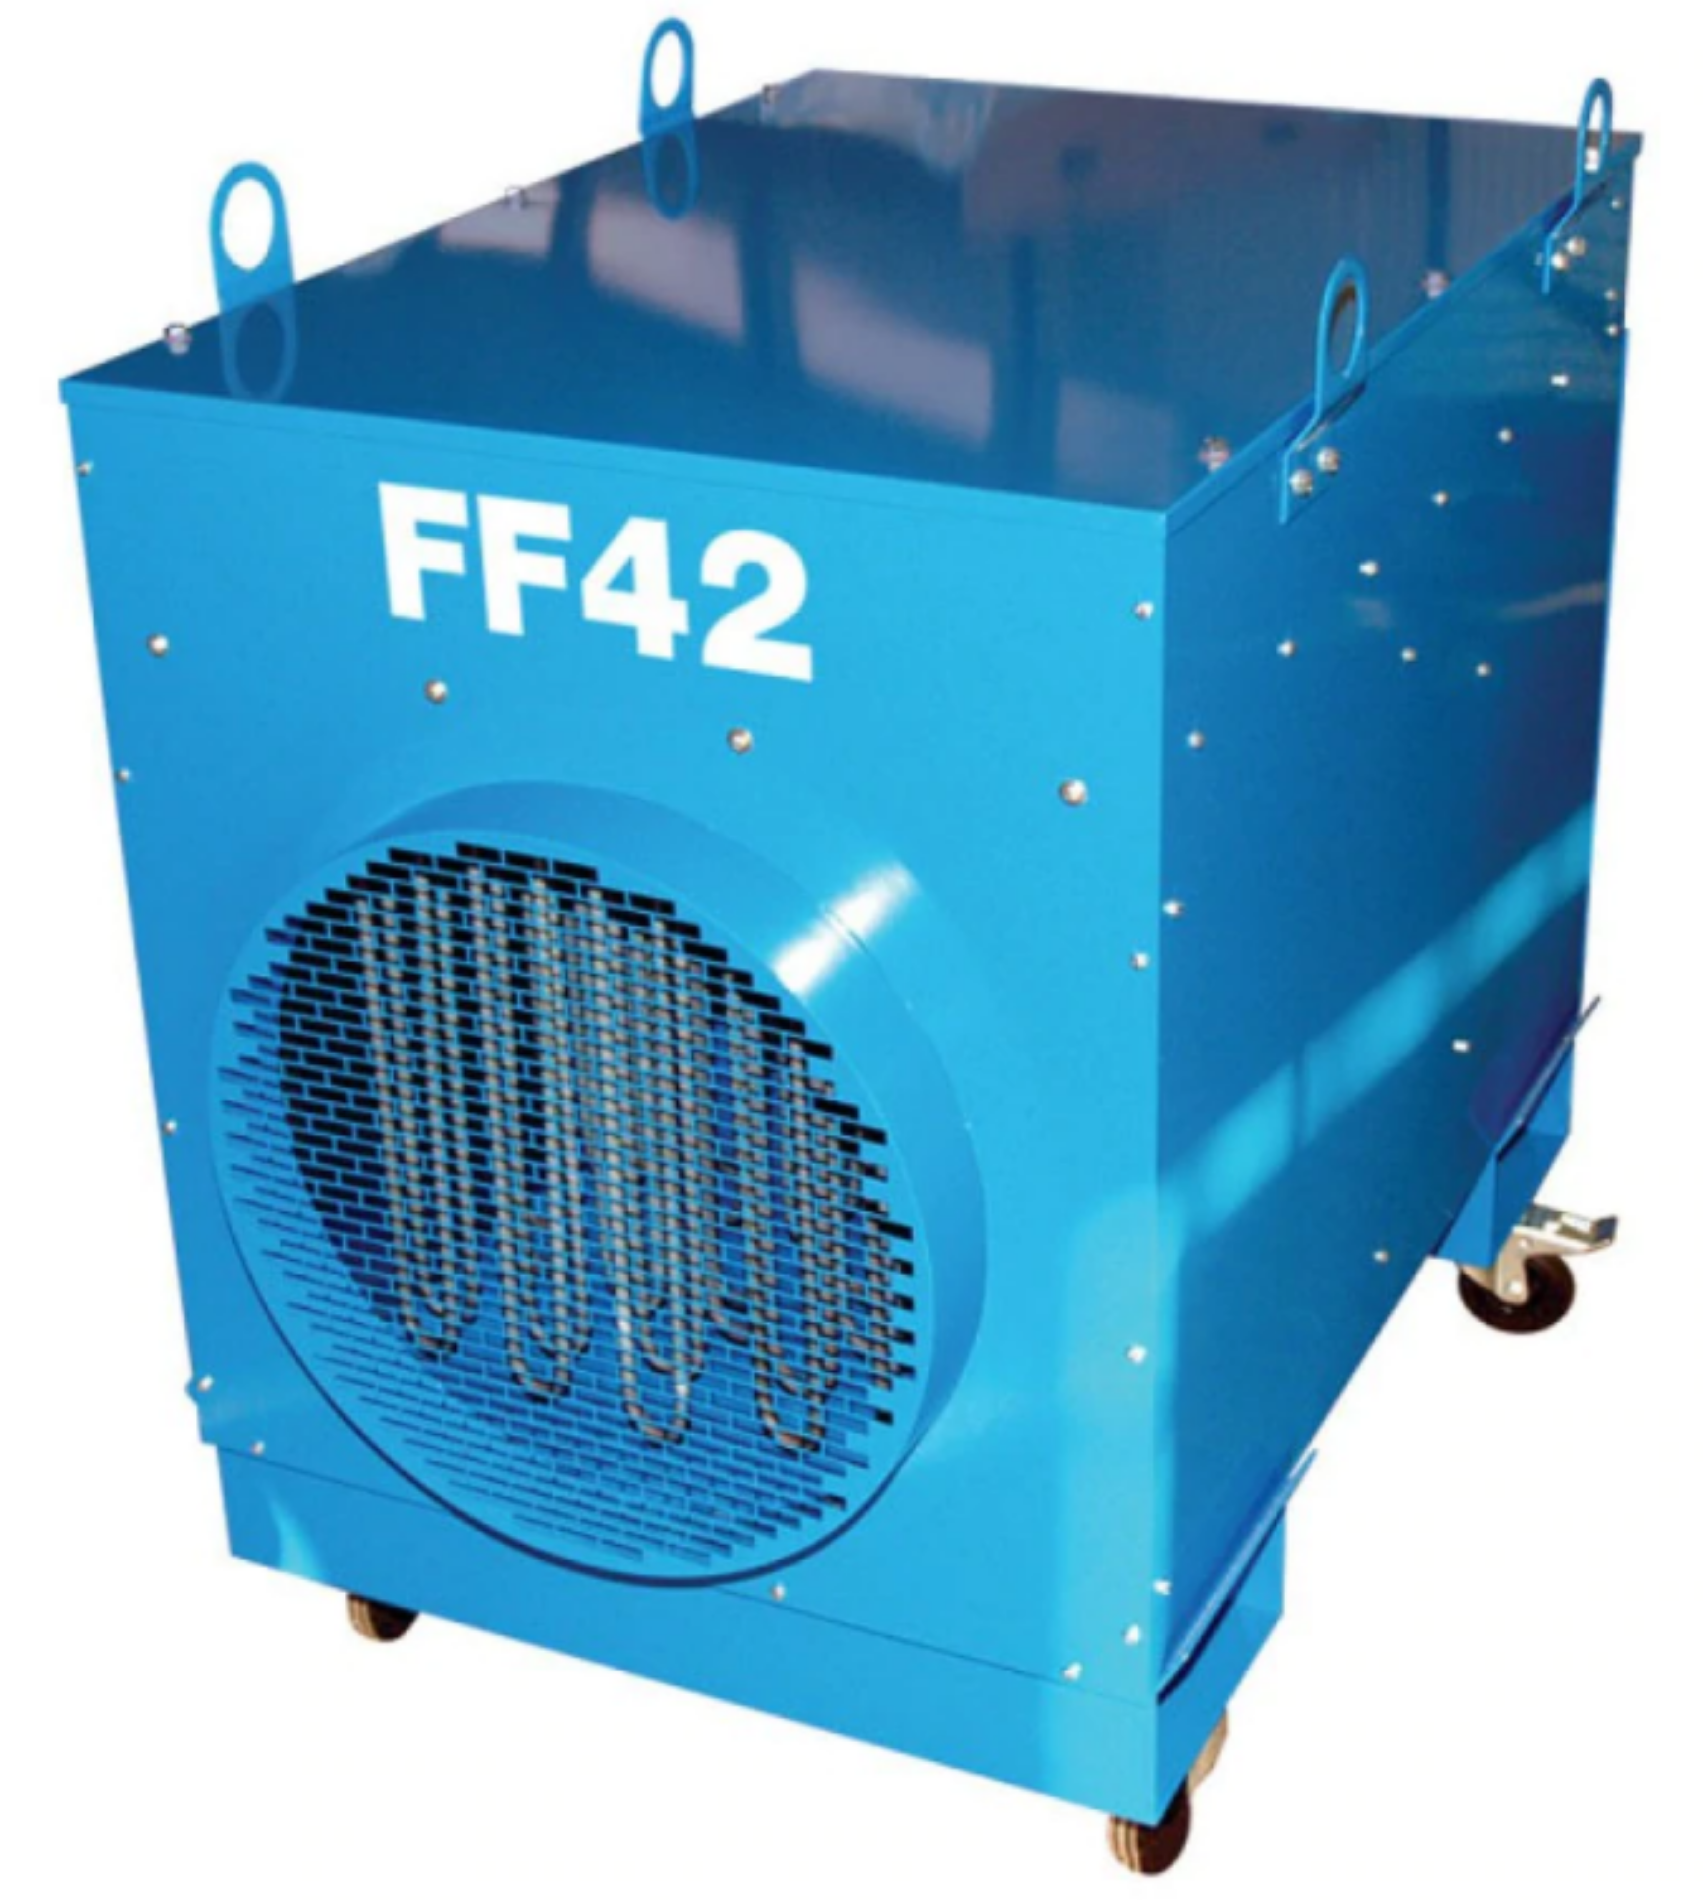 Broughton Super Giant FF42 400V 63a 3 phase 43kw portable industrial fan heater